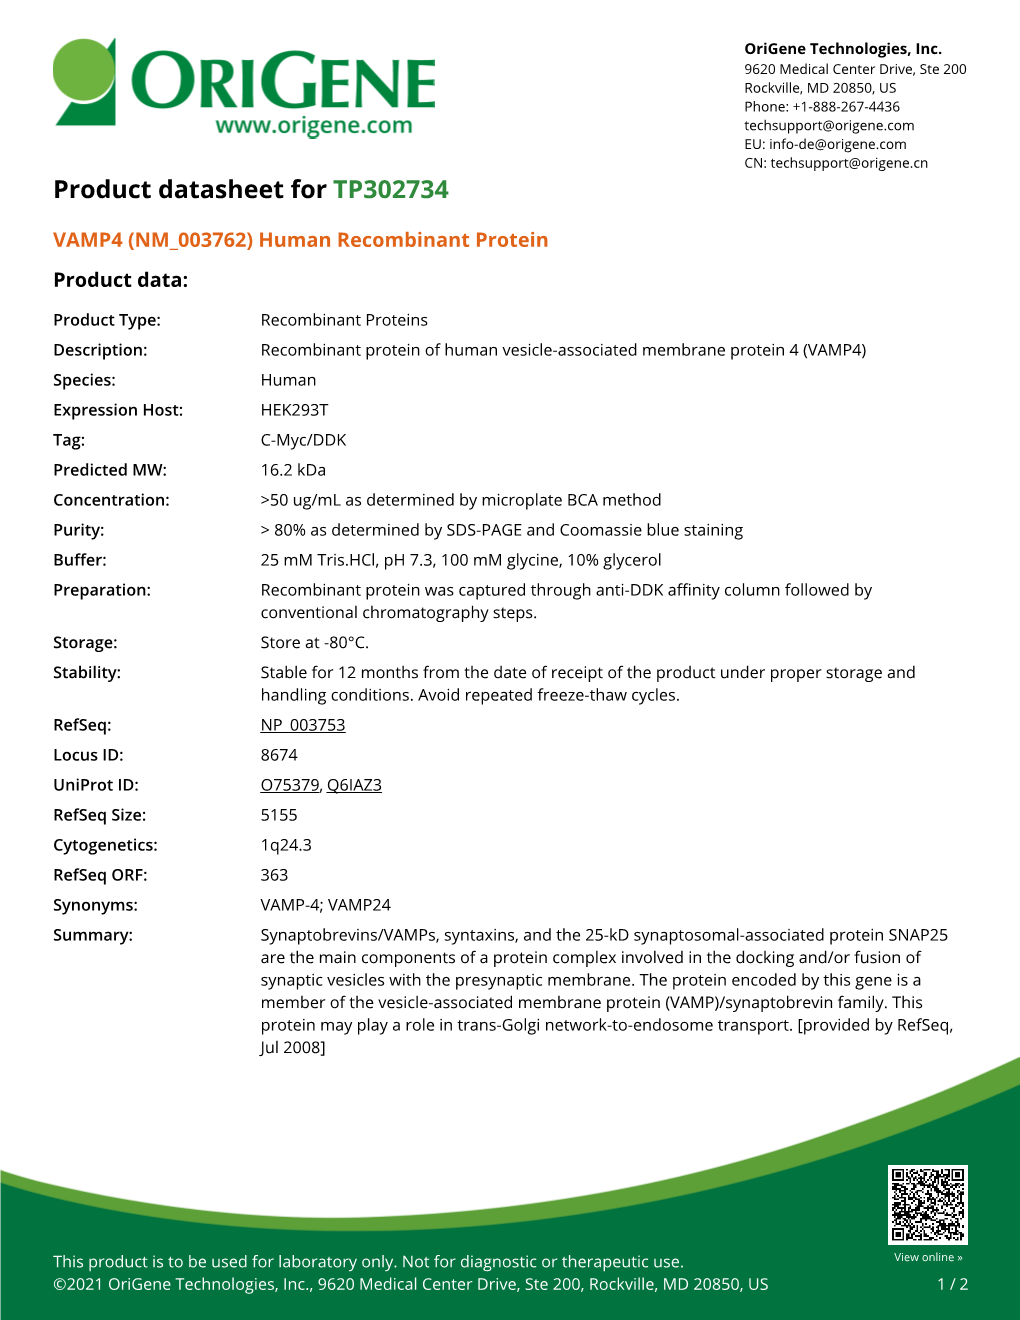 VAMP4 (NM 003762) Human Recombinant Protein Product Data